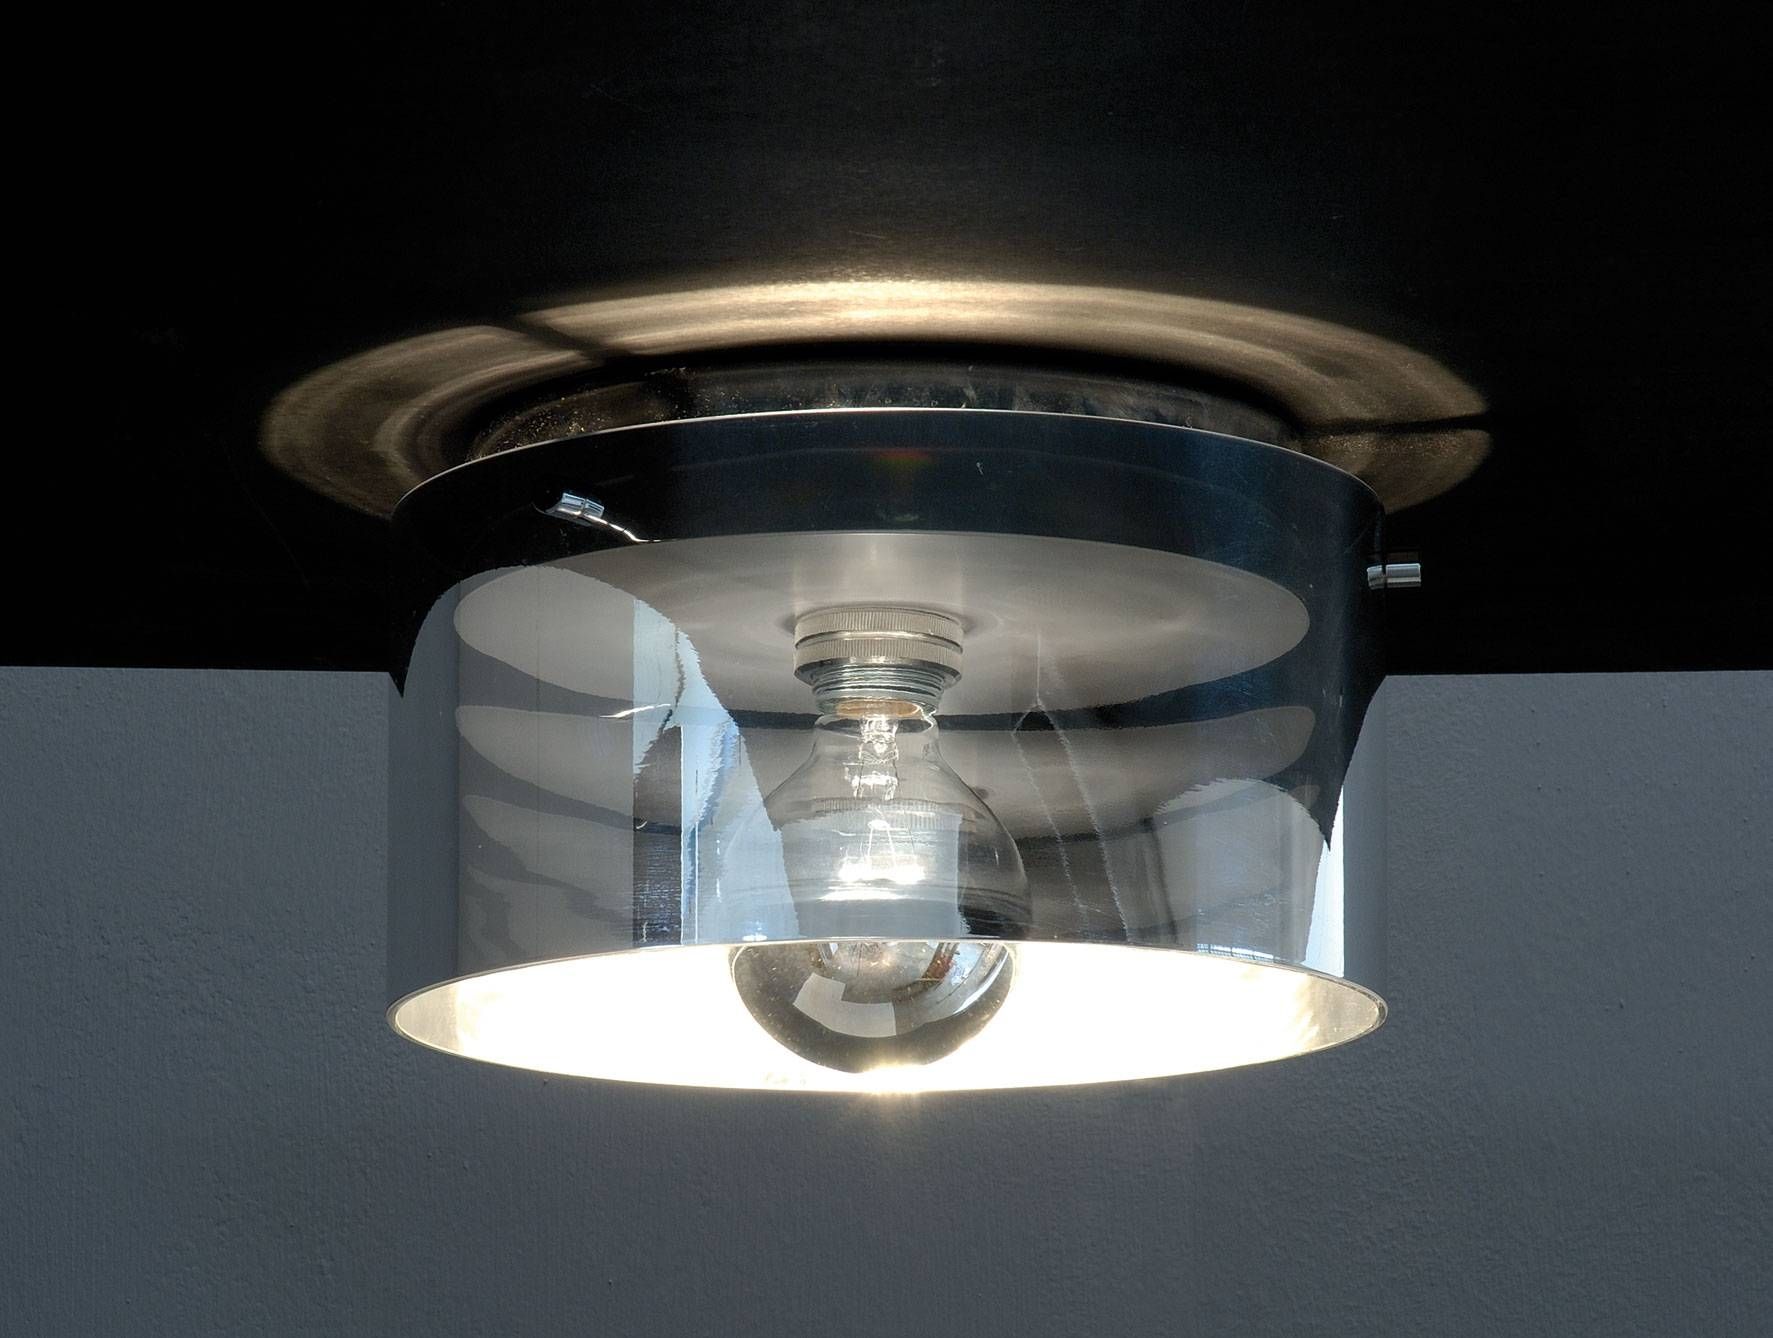 Nella Vetrina Maxi Mirror Contardi Pl Ceiling Light Mirrored Glass Intended For Ceiling Light Mirrors (View 4 of 15)